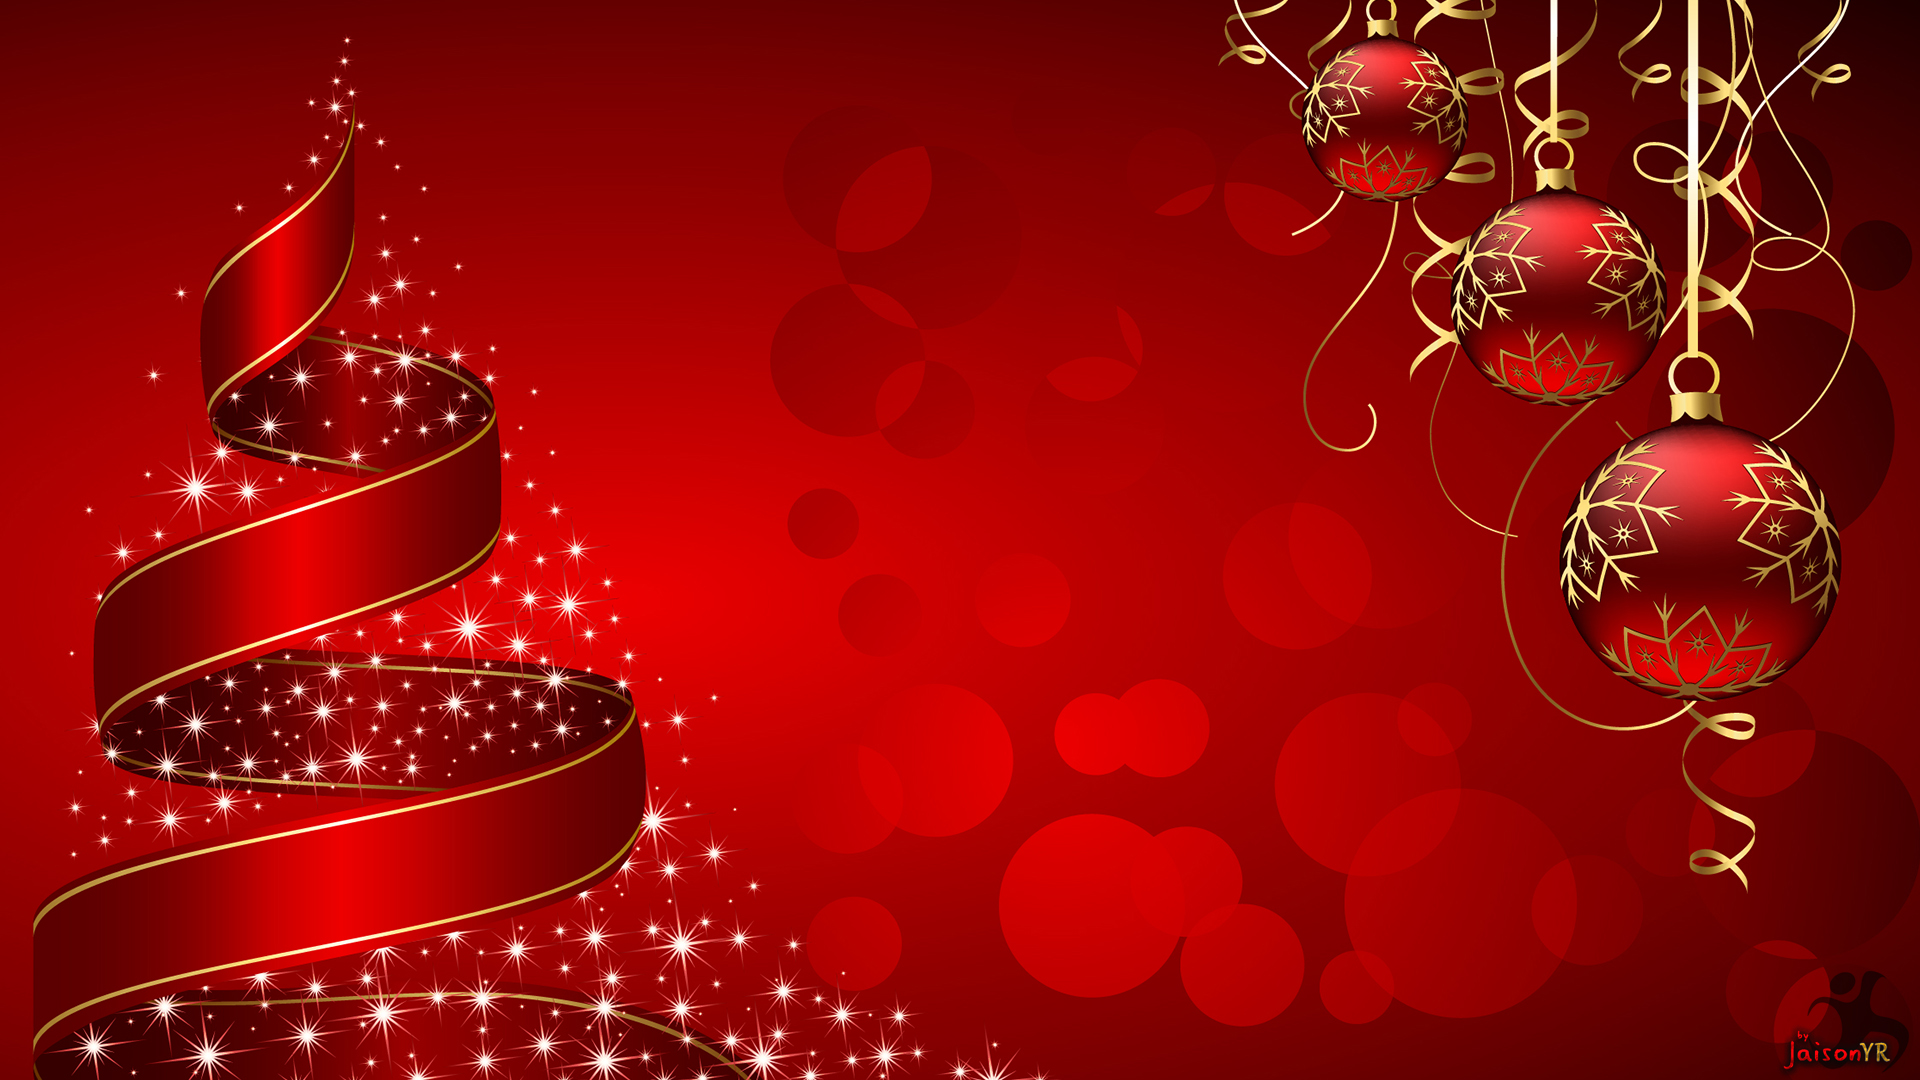 Christmas Background Pictures On